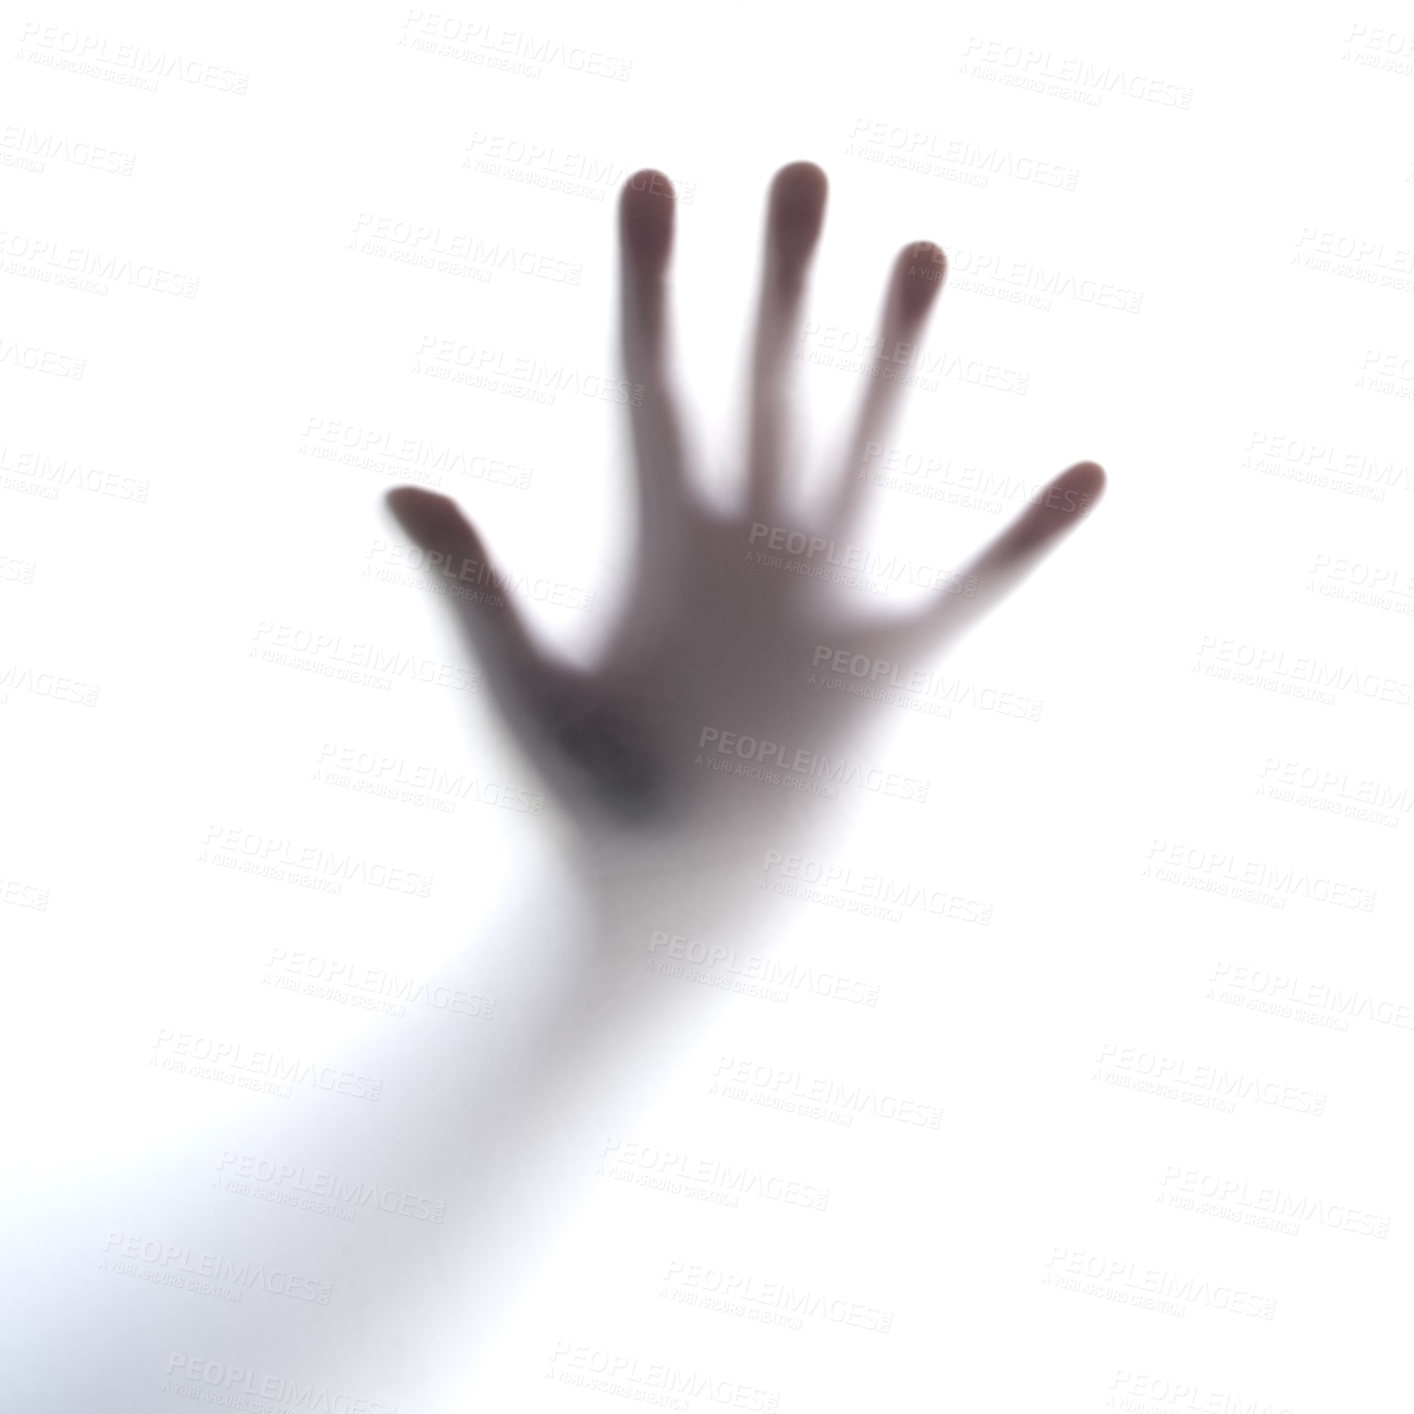 Buy stock photo Cropped shot of an unrecognizable person's hand against a seethrough film